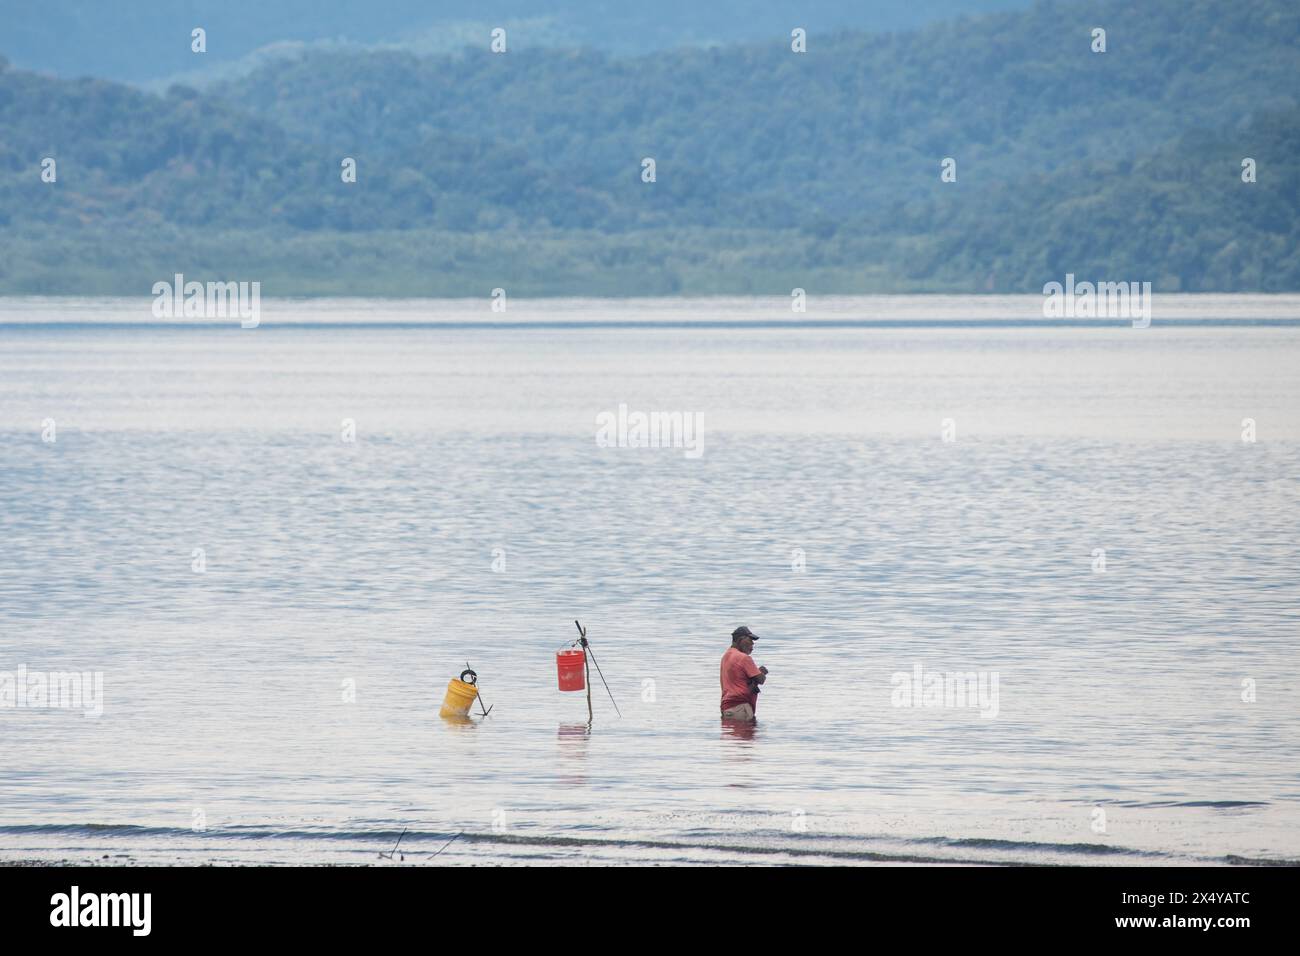 Subsistence or artisanal fishing is small scale marine harvest by individual fishermen, like this local man in Costa Rica catching fish in Golfo Dulce. Stock Photo